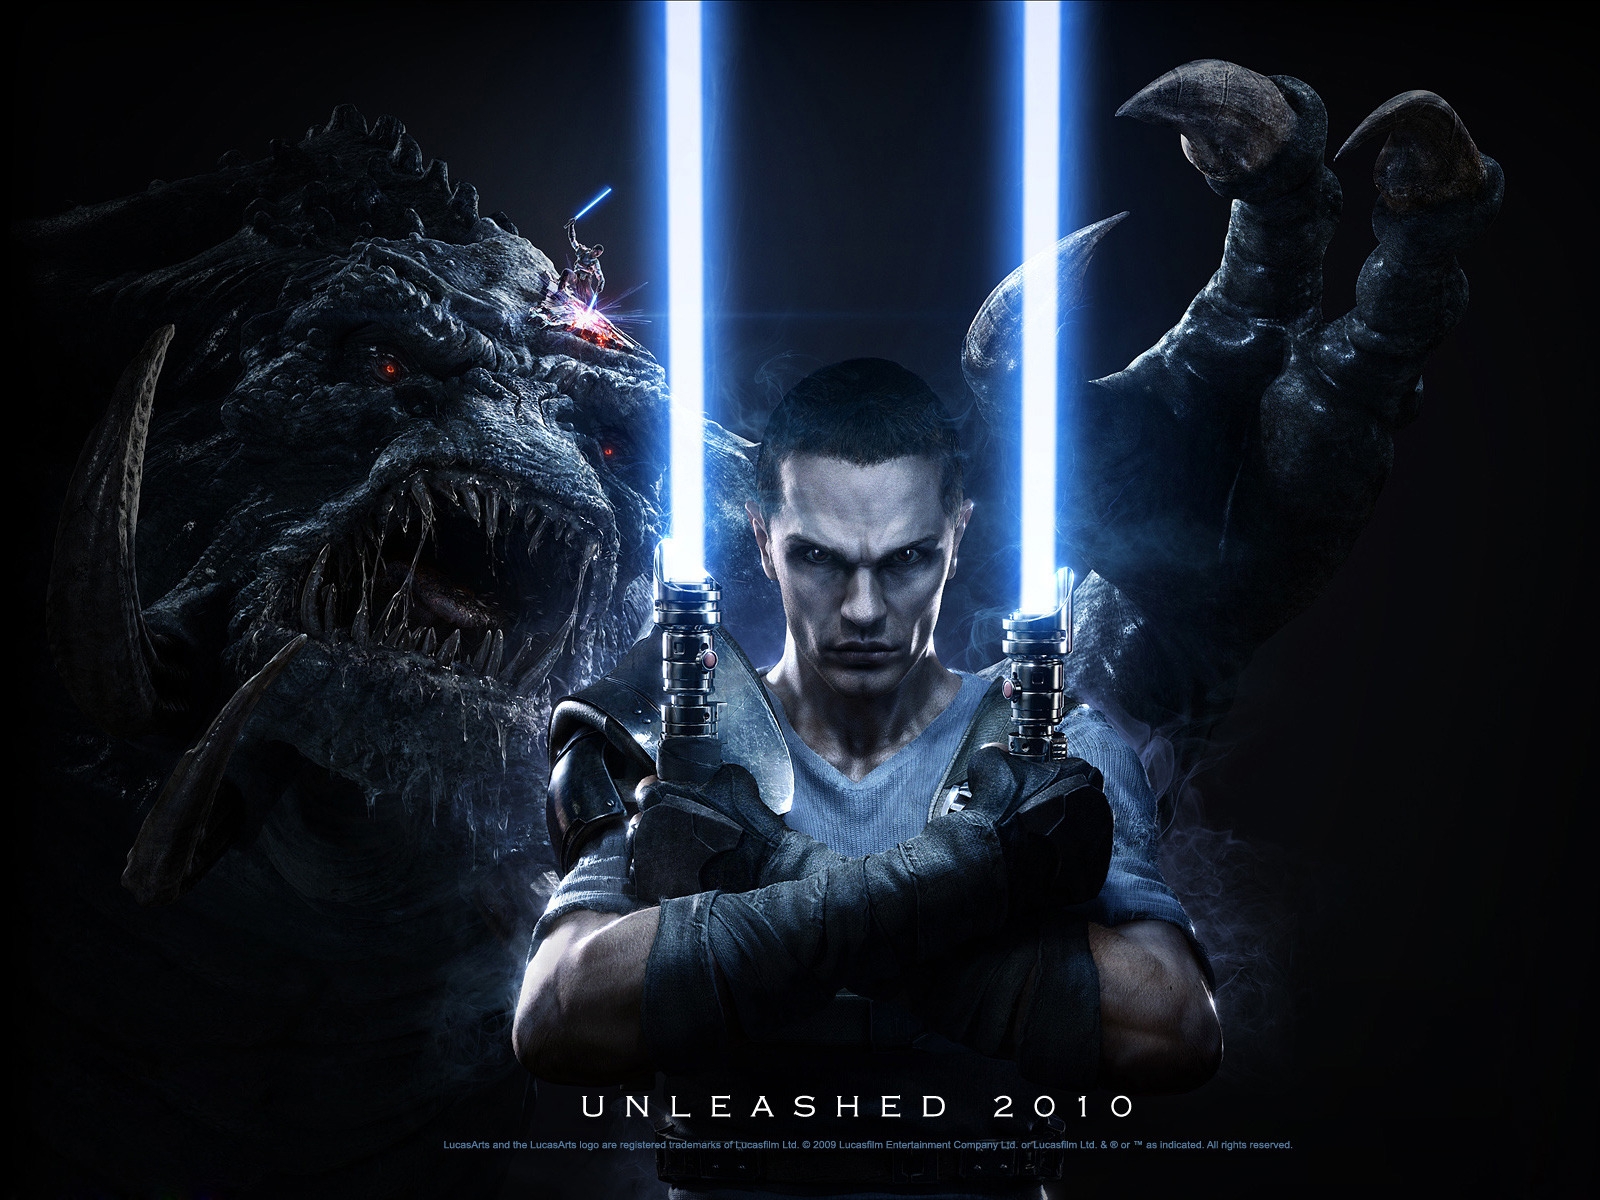 Star Wars The force Unleashed 2 for 1600 x 1200 resolution